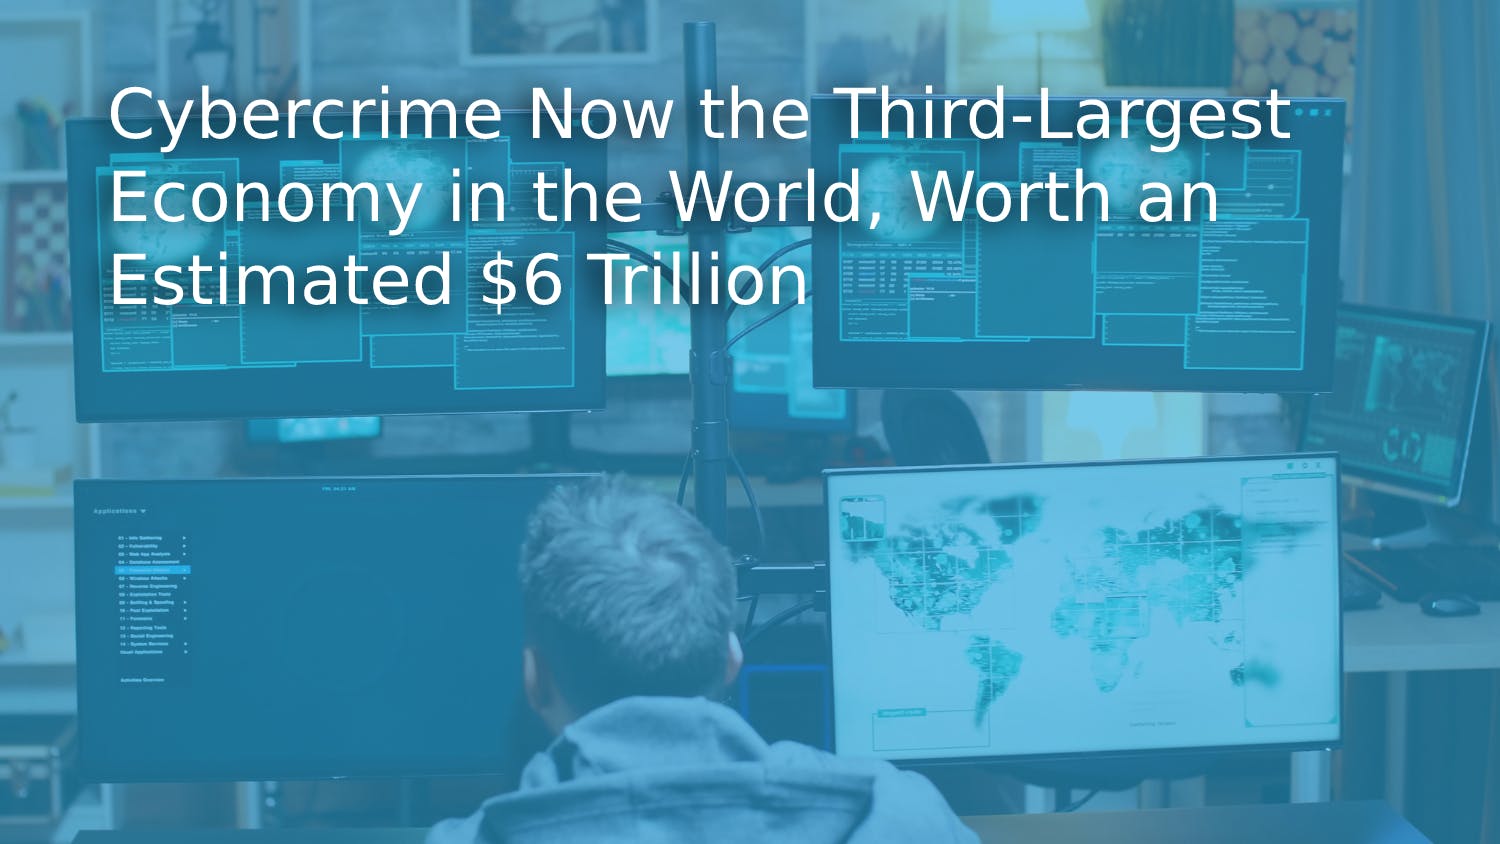 Cybercrime Now the Third-Largest Economy in the World, Worth an Estimated $6 Trillion